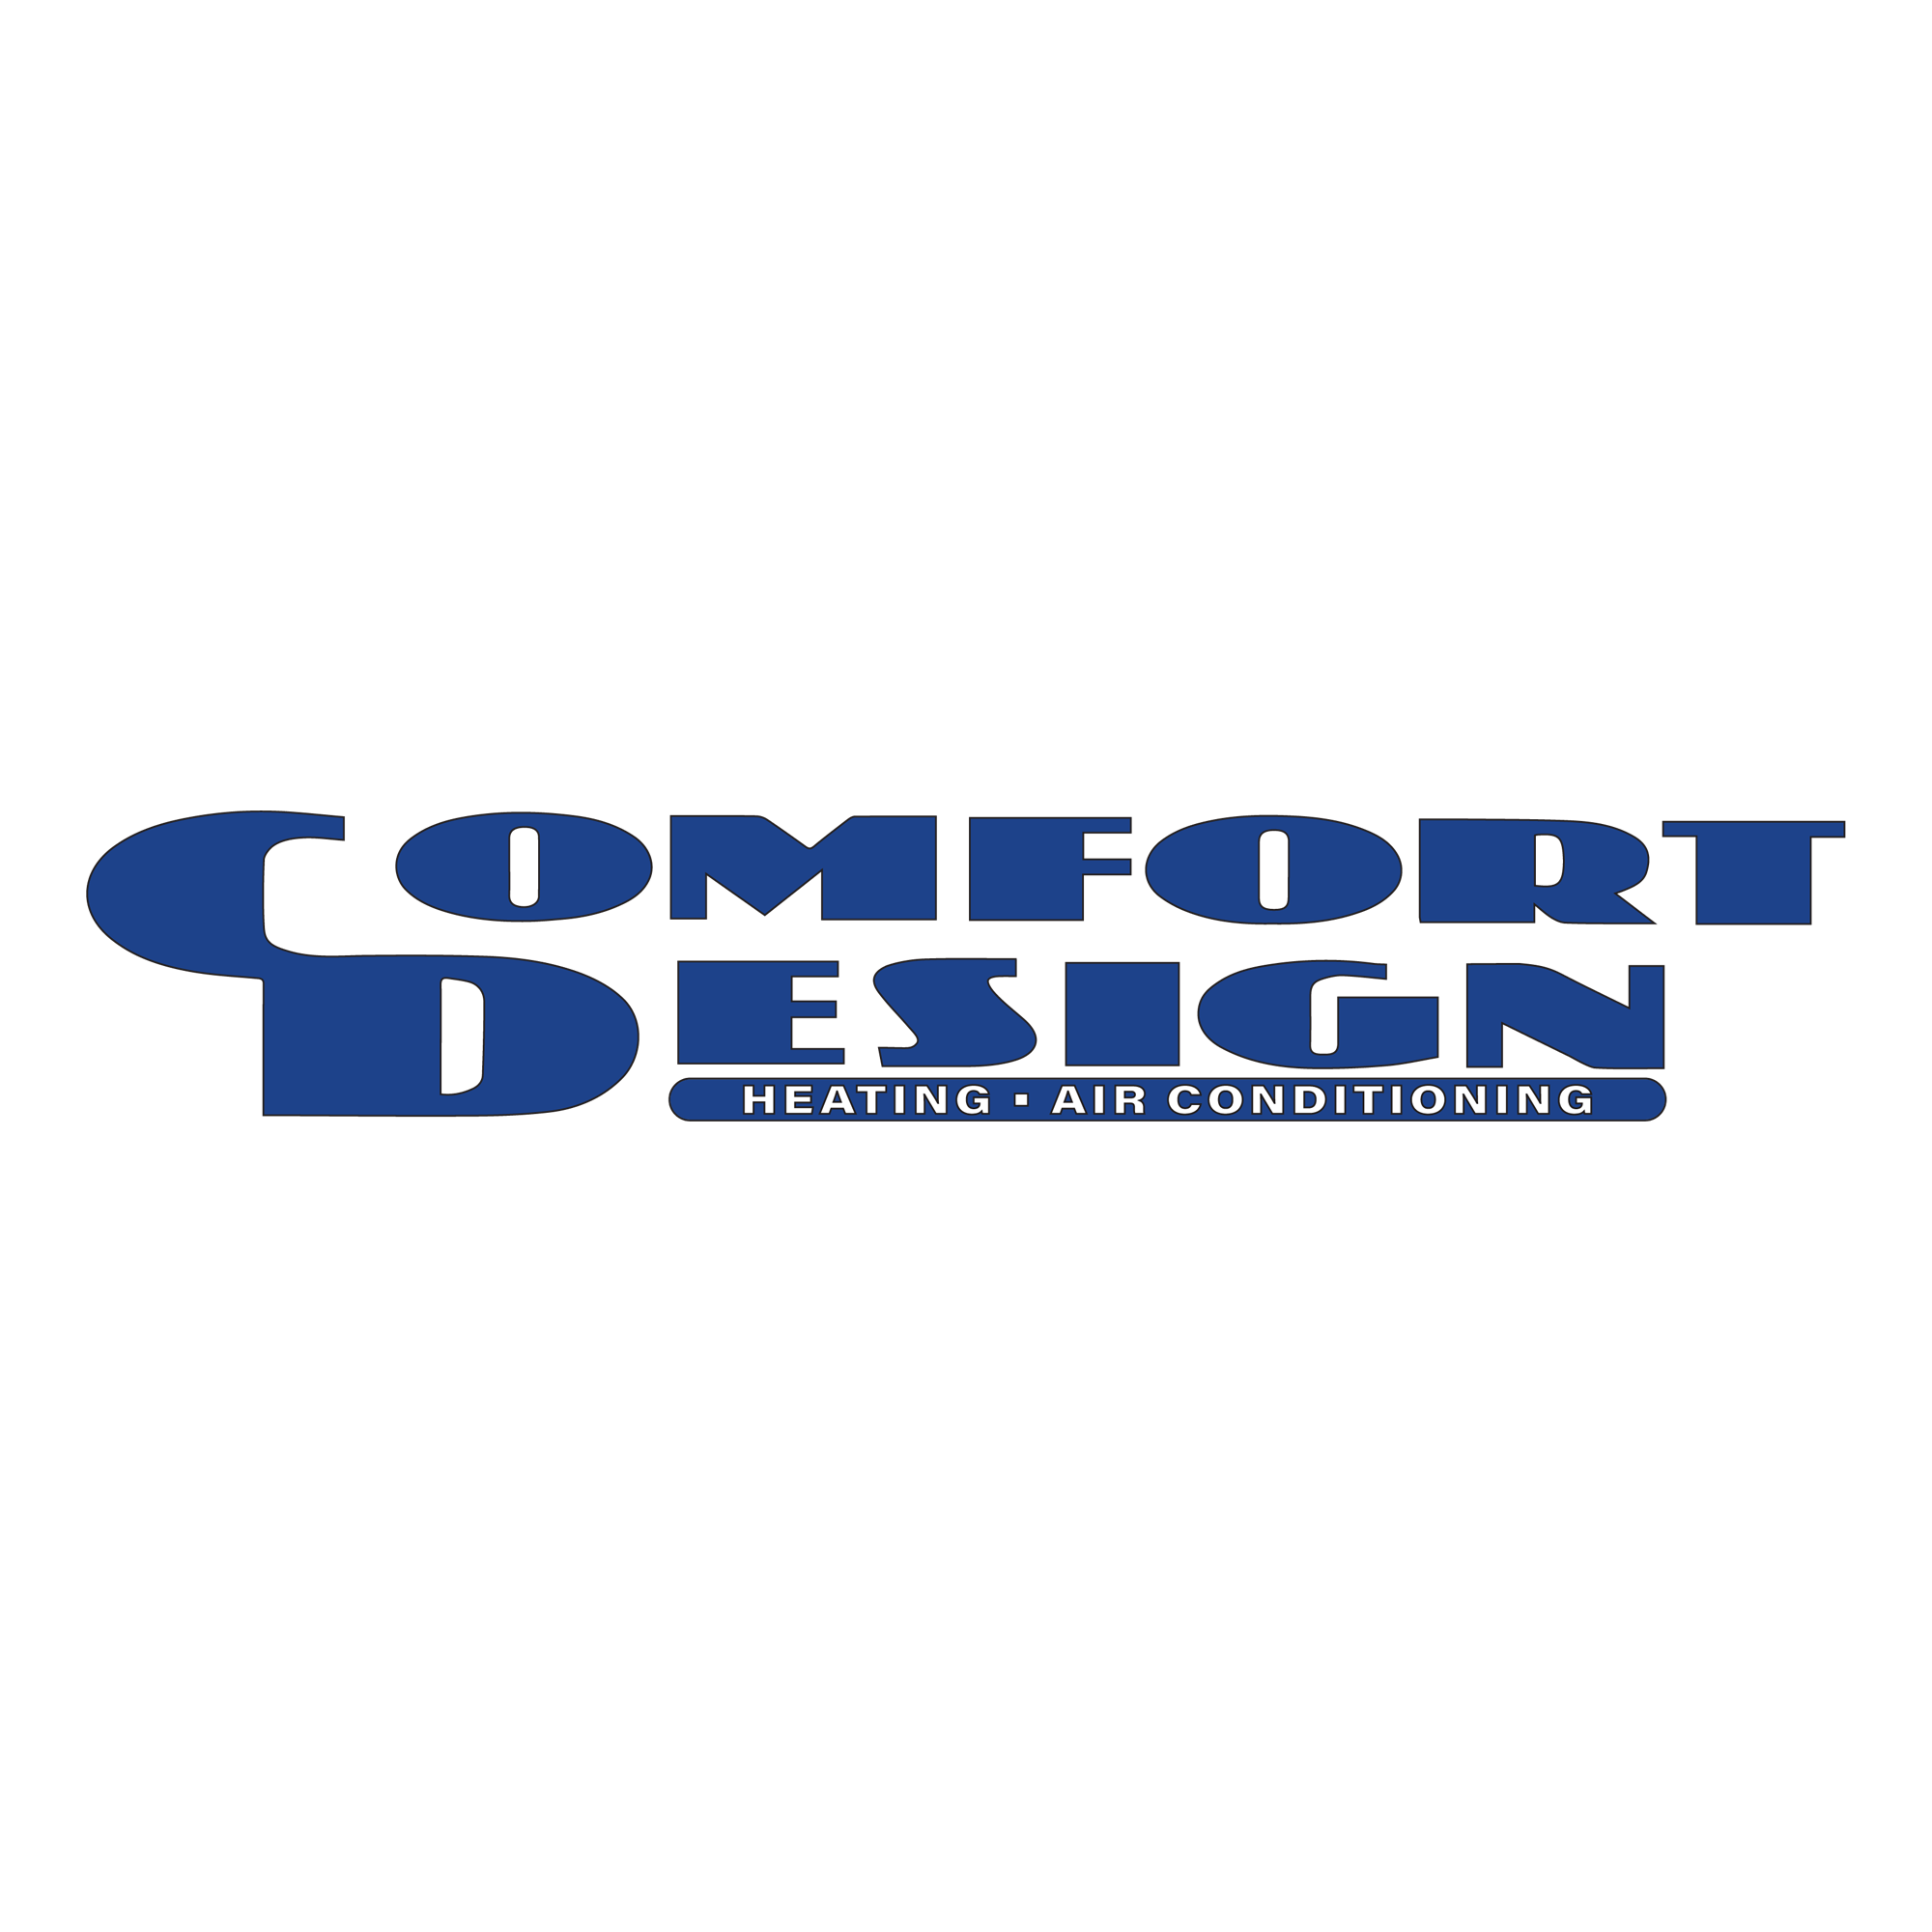 Comfort Design Heating and Air Conditioning